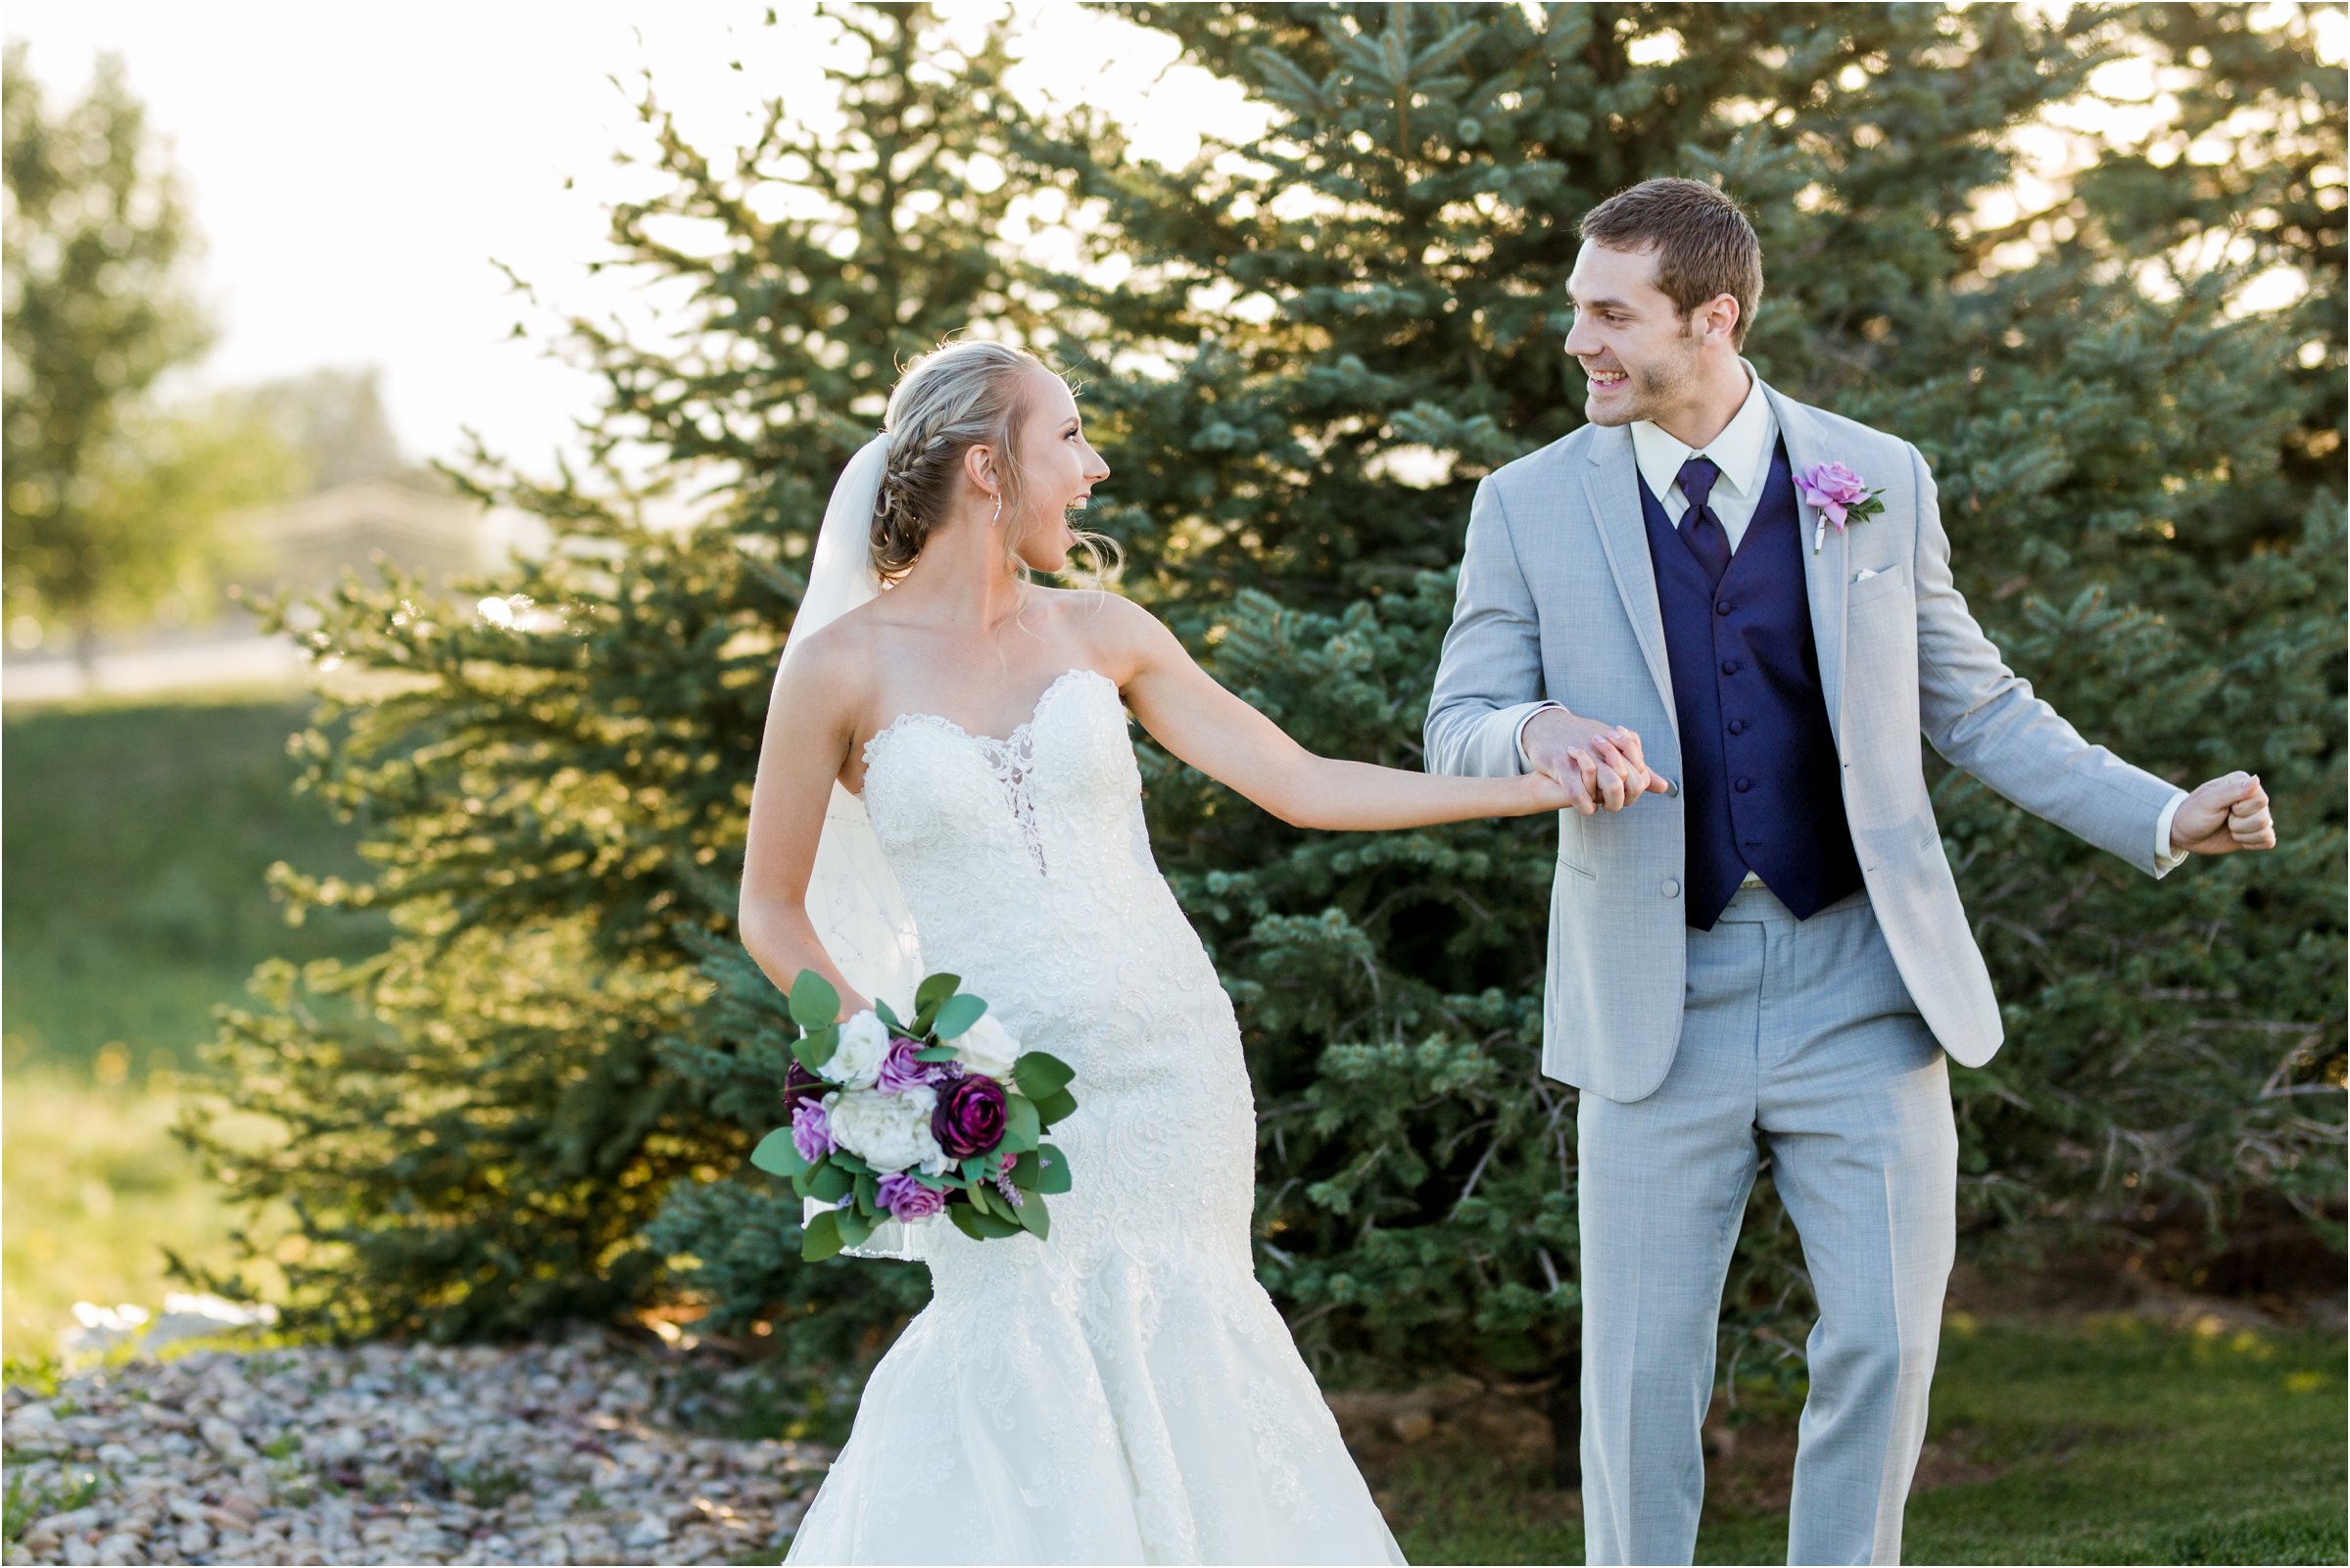 bride and groom dance together in front of trees as the golden light of sunset shines through